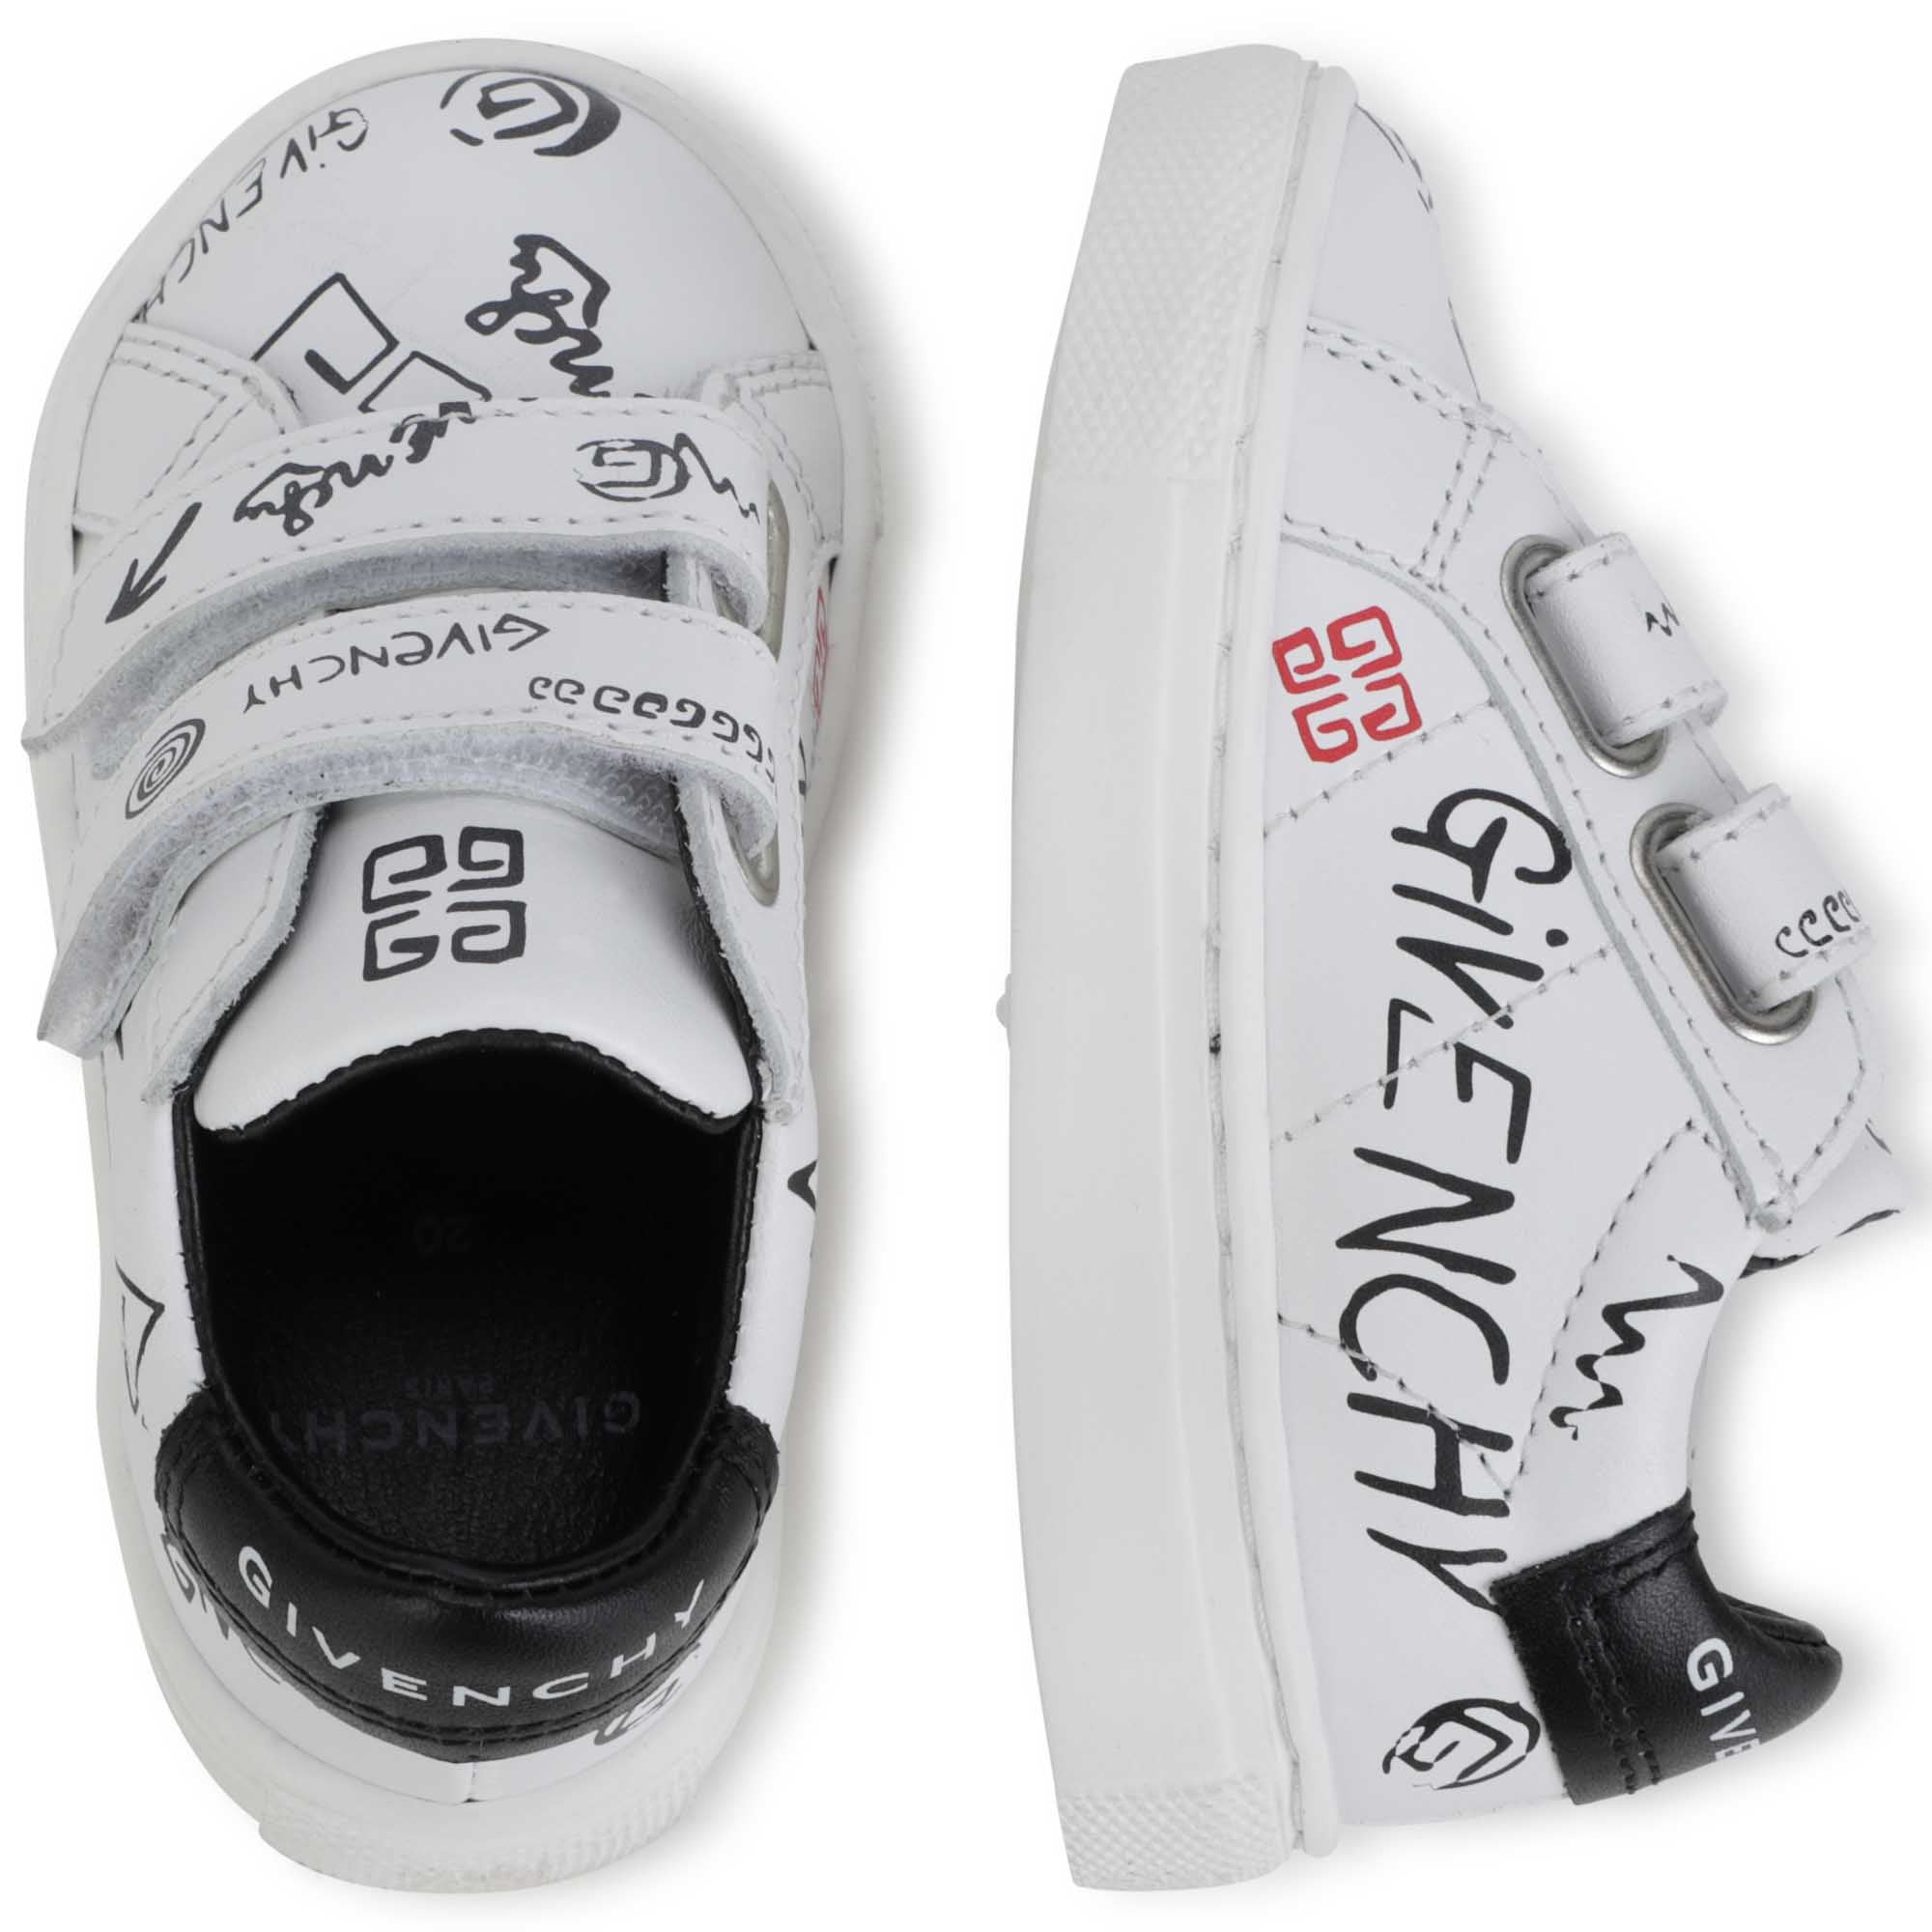 Givenchy Baby Graffiti Sneakers